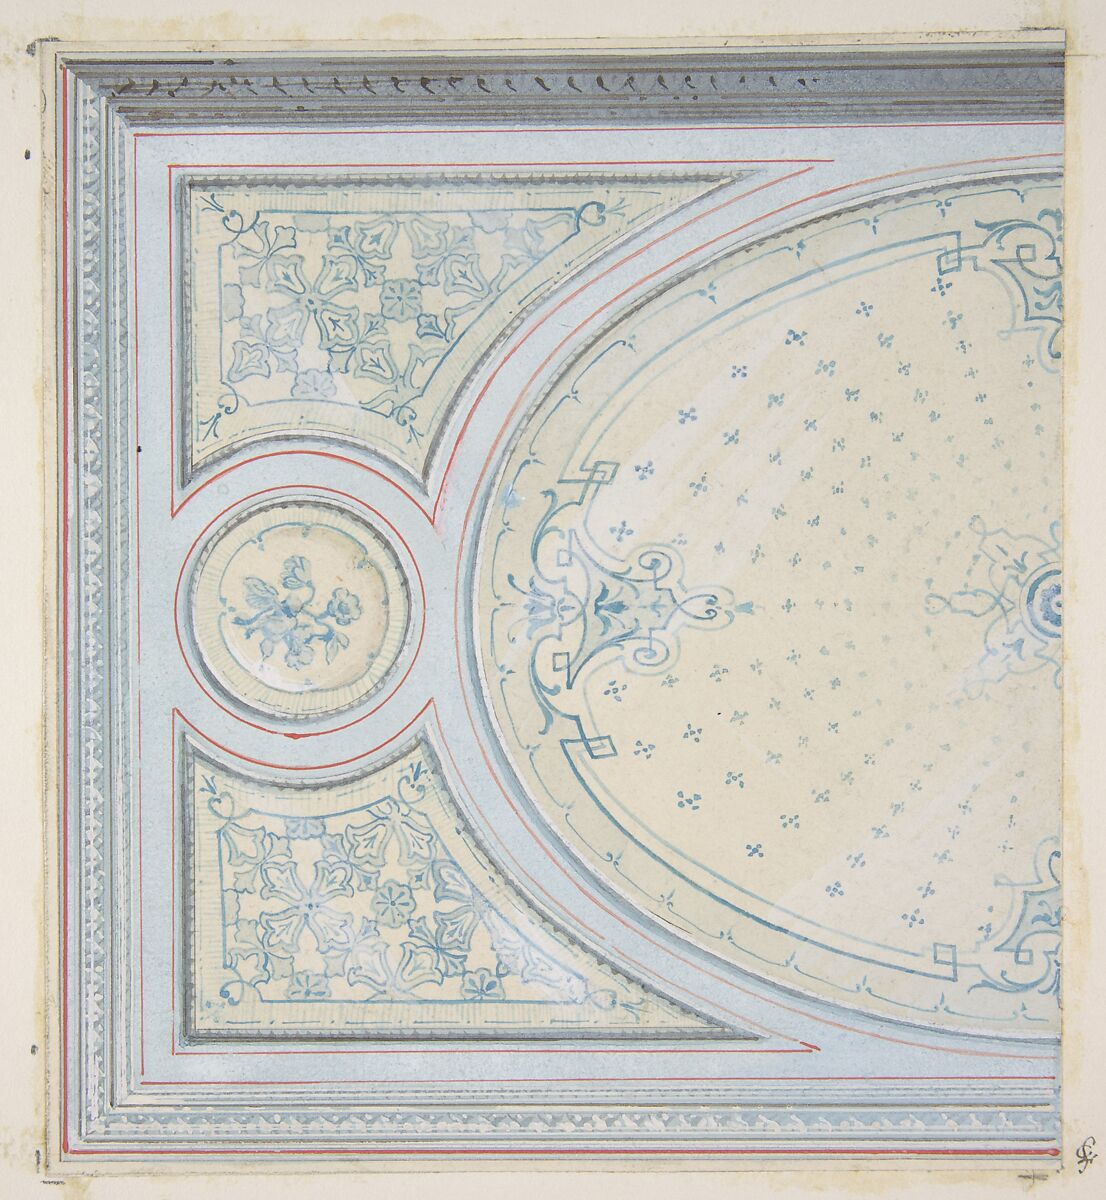 Design for the decoration of a ceiling, Jules-Edmond-Charles Lachaise (French, died 1897), pen and ink, watercolor, and gouache on wove paper; mounted on wove paper 